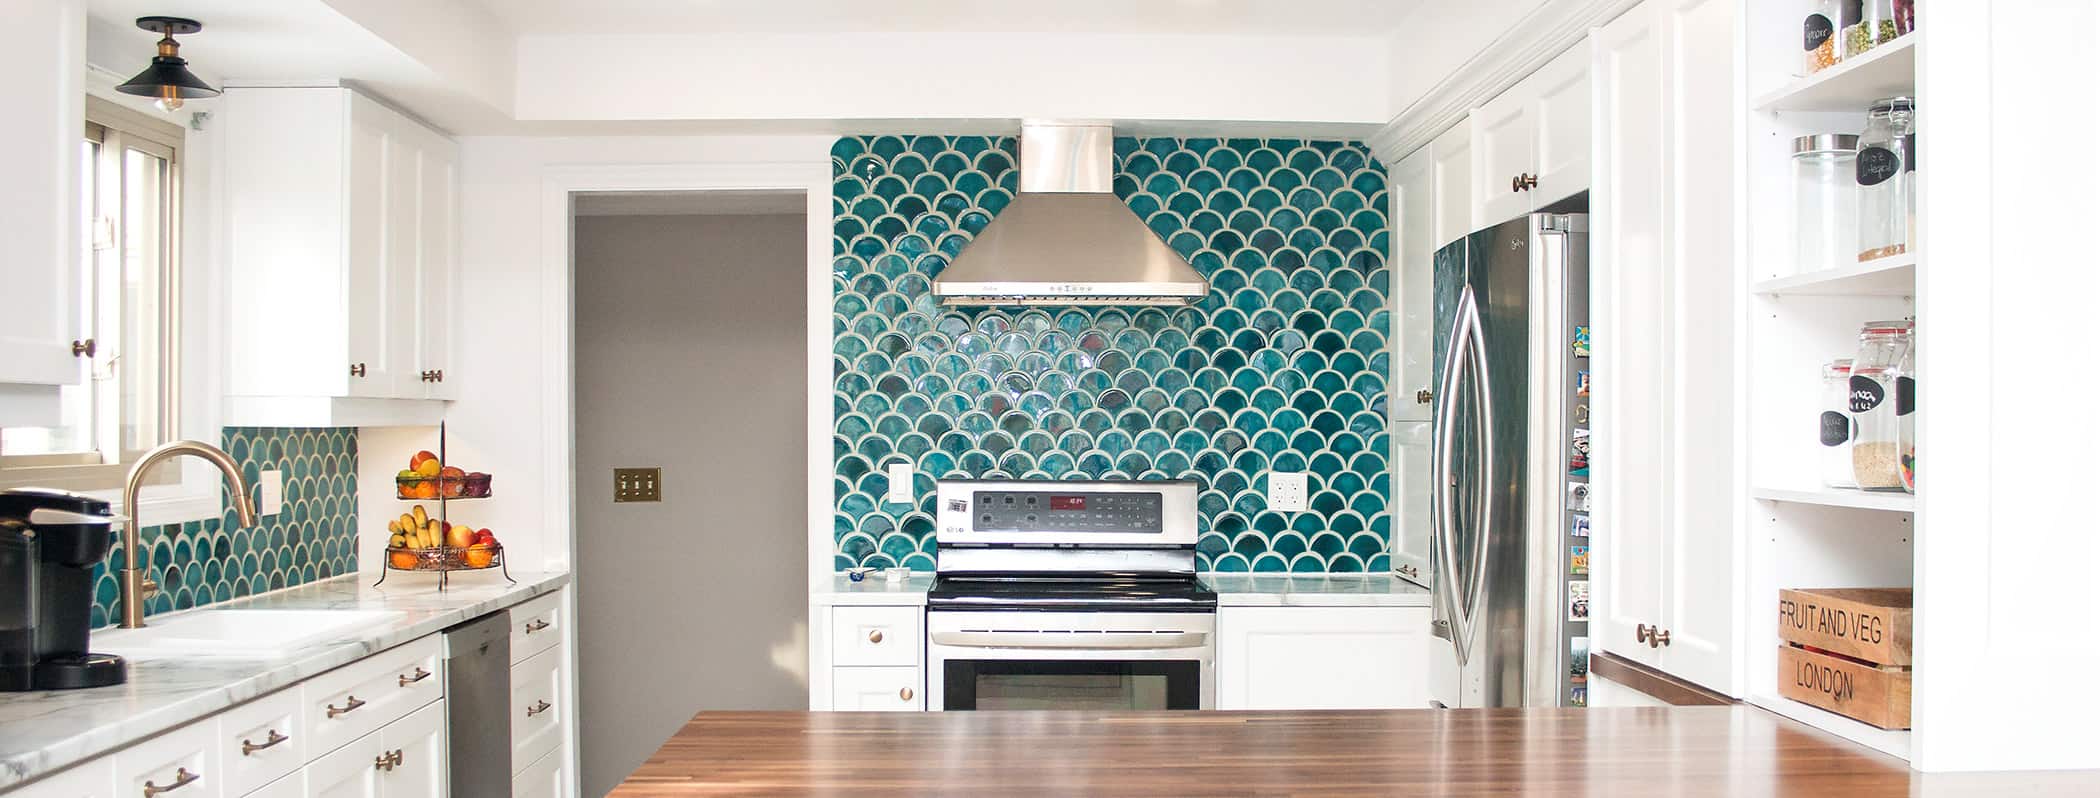 Contemporary white kitchen with fishscale teal tile backsplash